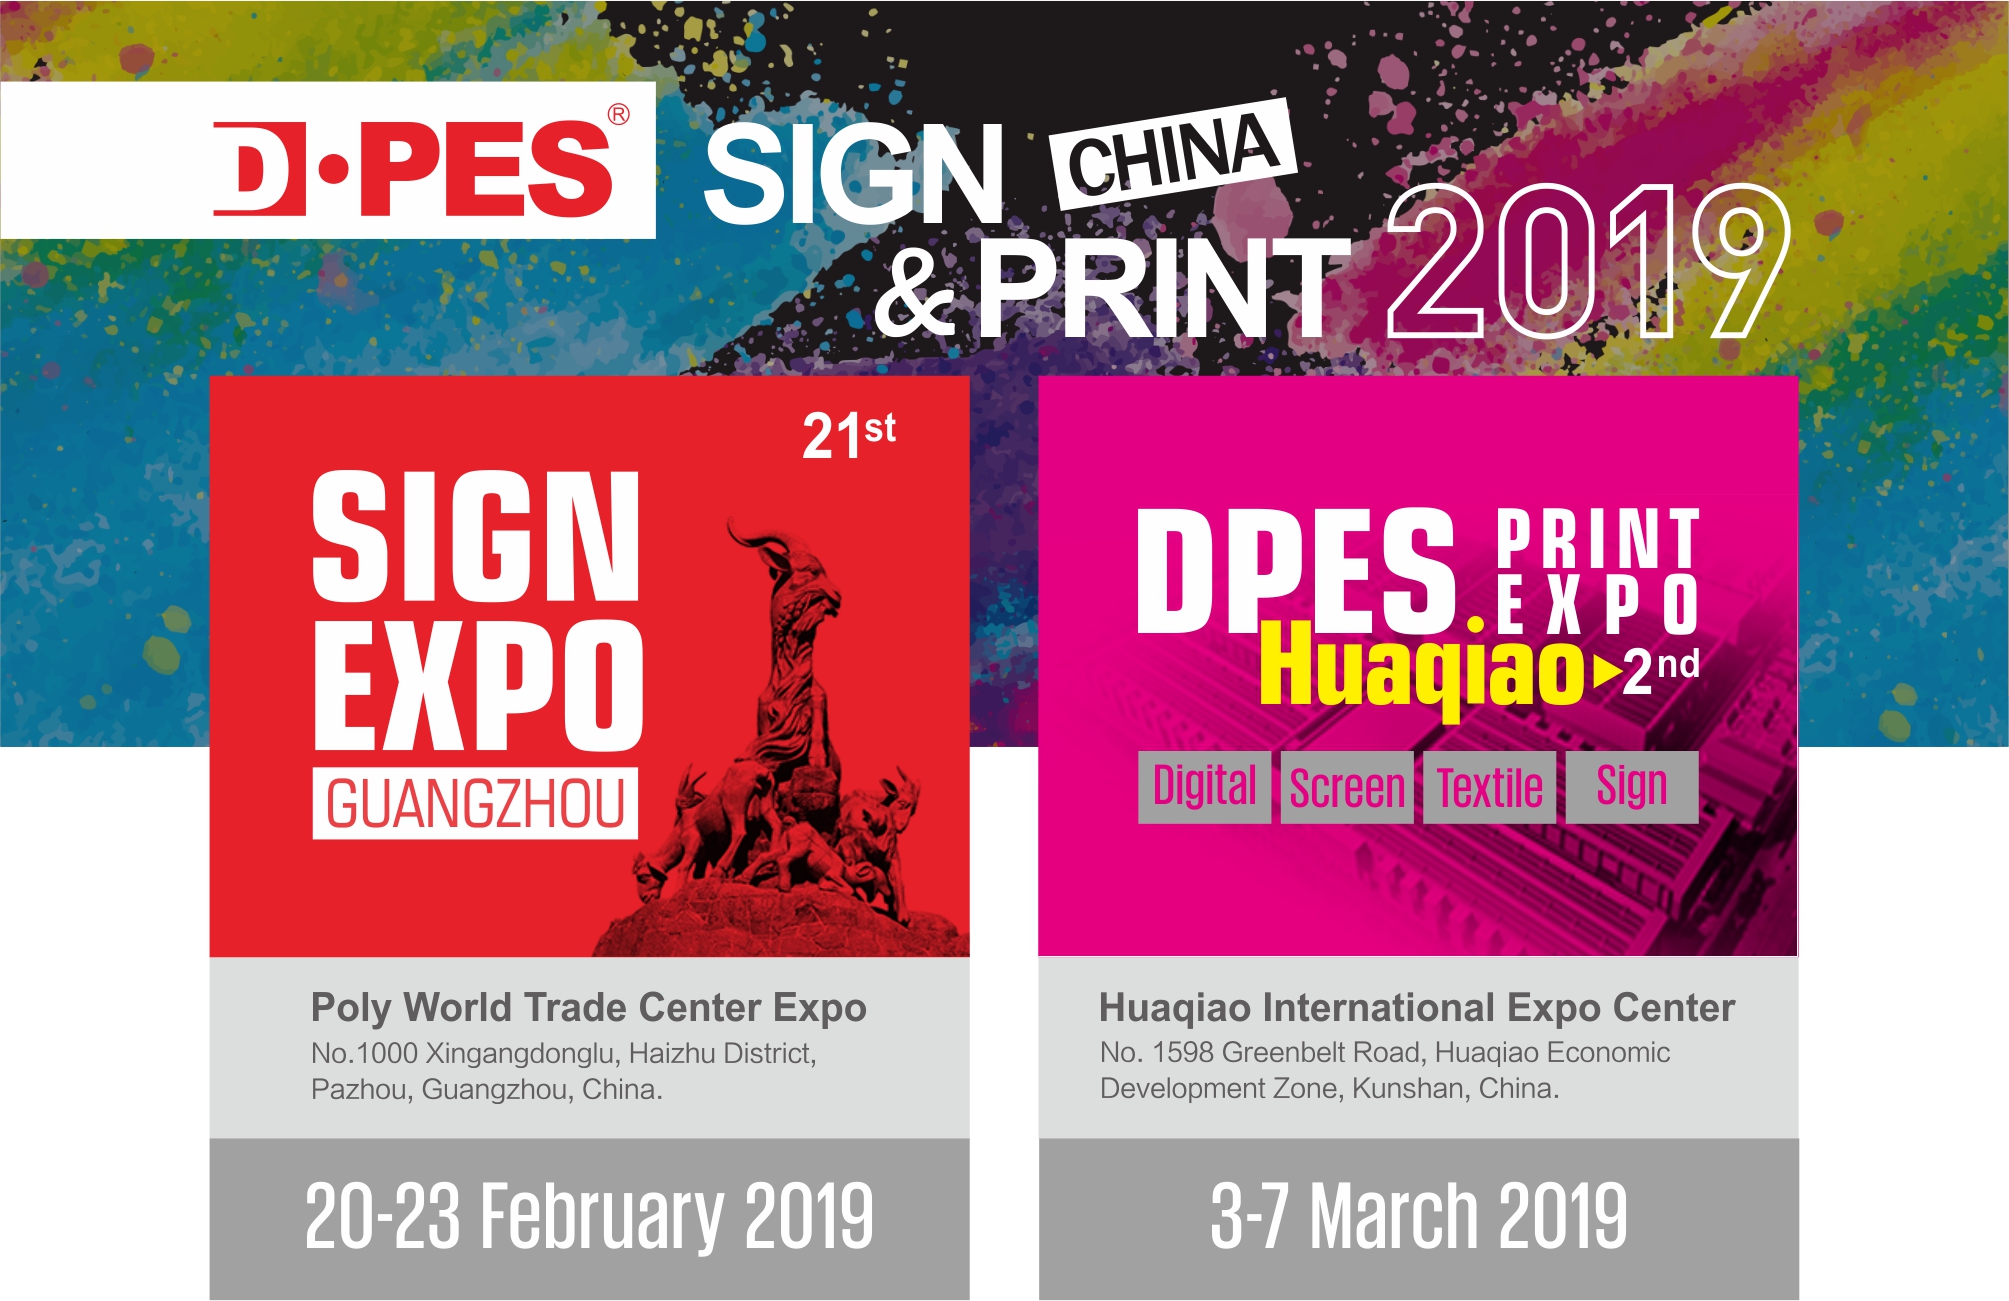 Issue 1 — Plan Your Trip to DPES 2019